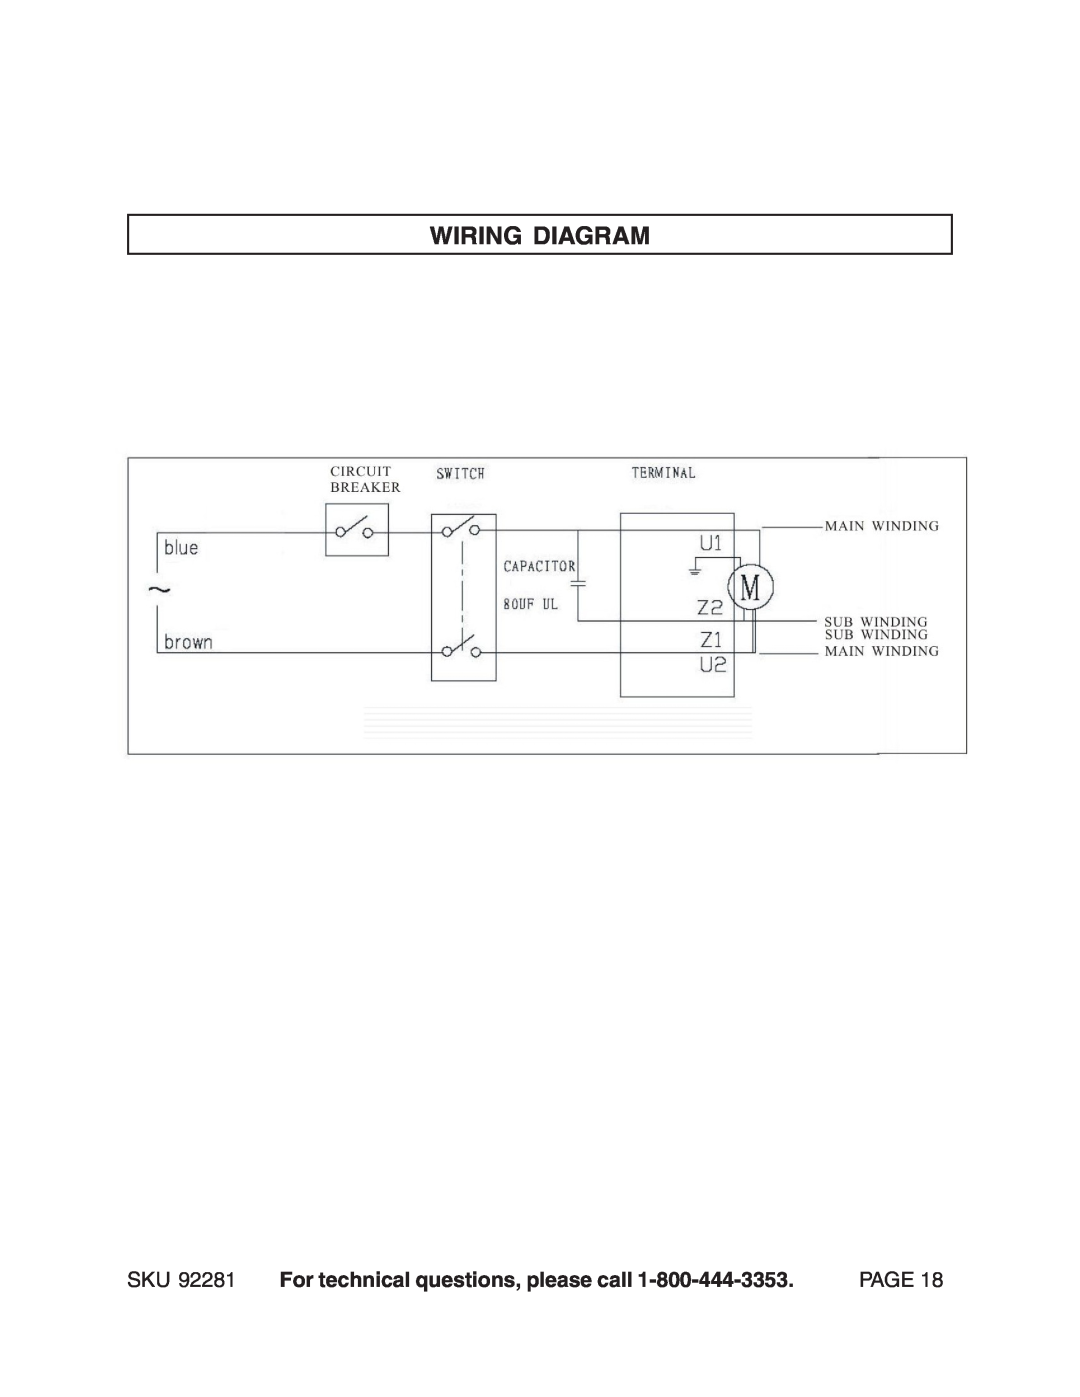 Harbor Freight Tools 92281 manual Wiring Diagram, For technical questions, please call, Page 